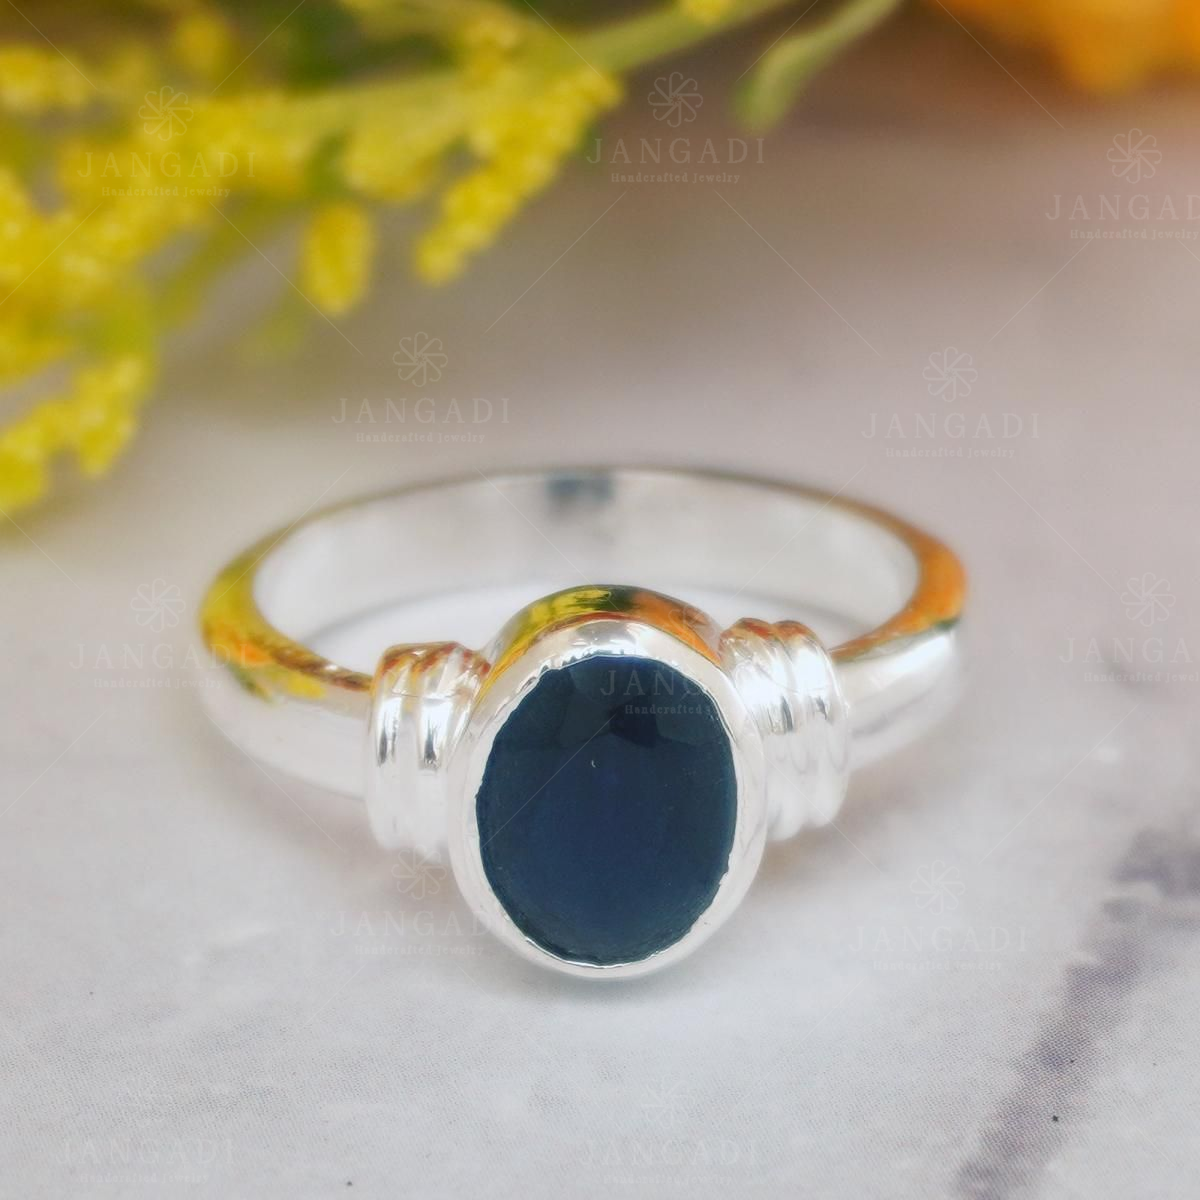 2015 New Design Ladies Finger Ring Mood Stone Ring Wholesale $1.4 -  Wholesale China 2015 New Design Ladies Finger Ring Mood Stone Ring at  factory prices from Yiwu Mobao Trading Co. Ltd | Globalsources.com